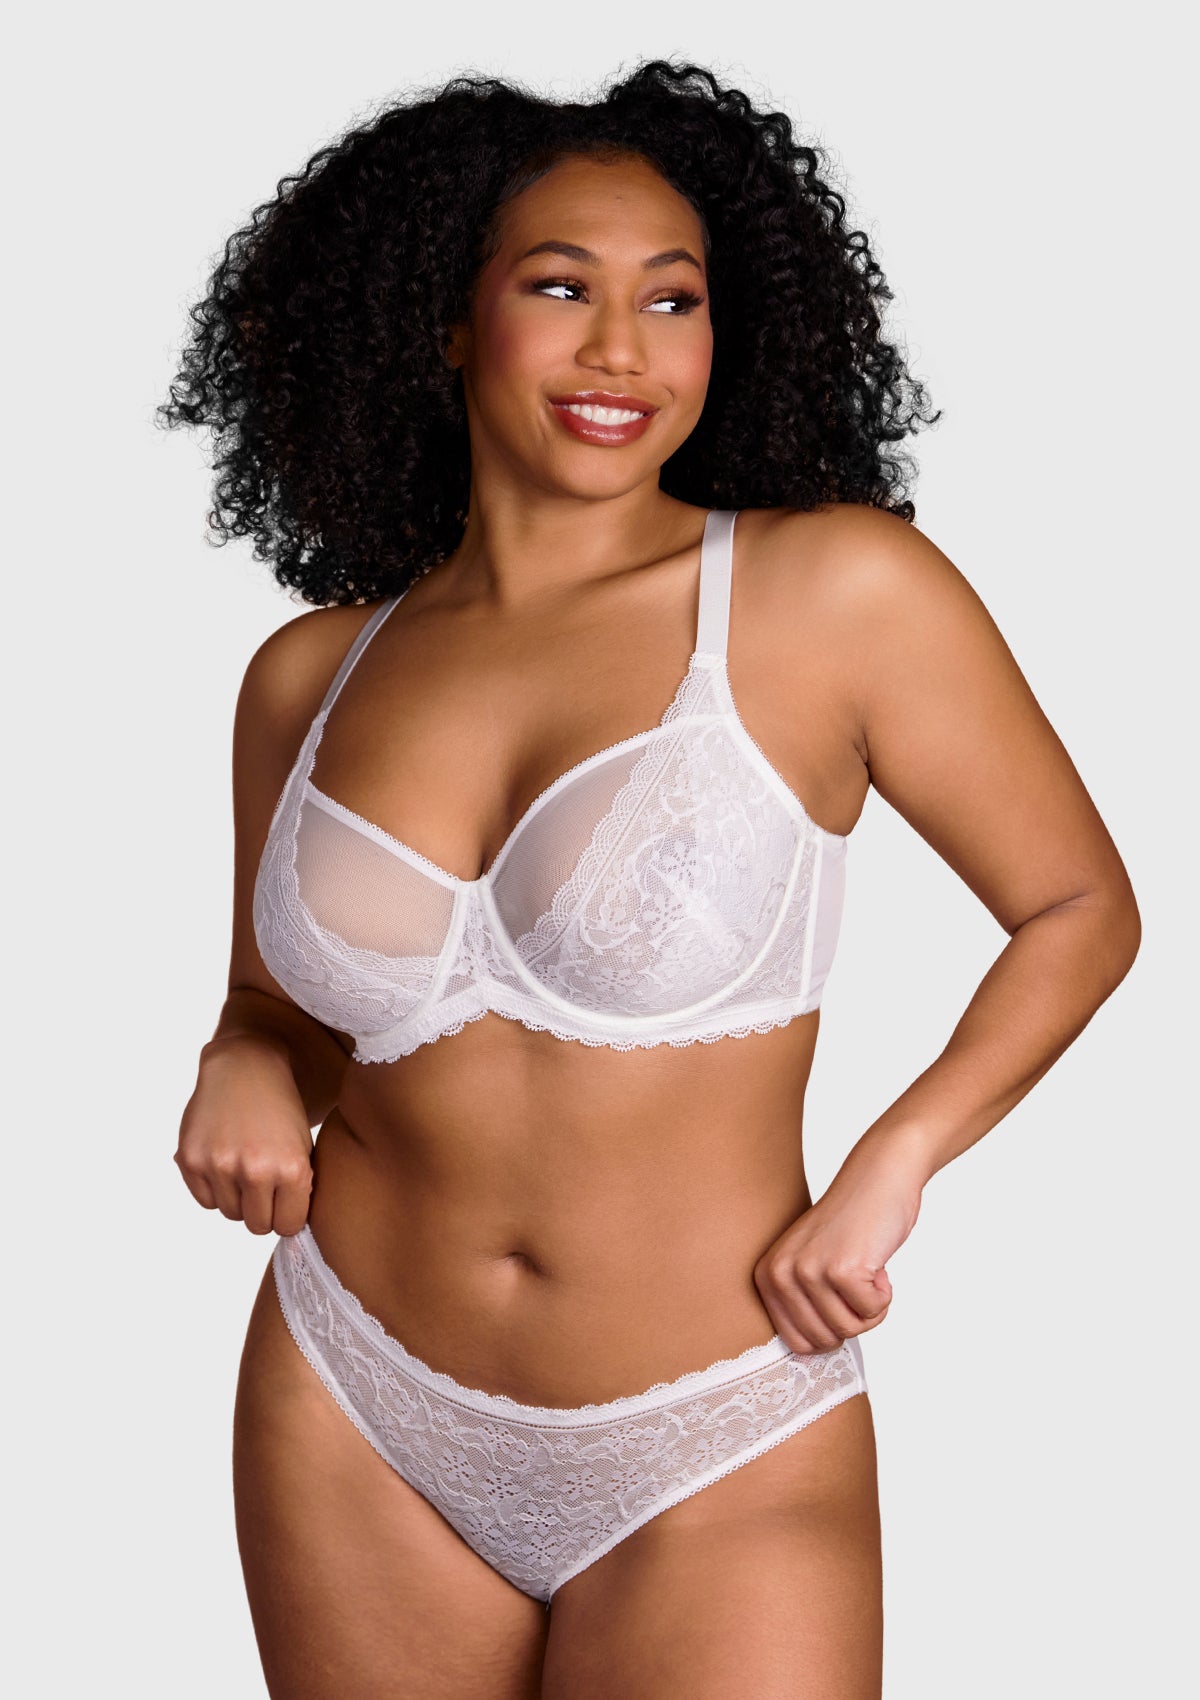 HSIA Anemone Big Bra: Best Bra For Lift And Support, Floral Bra - Burgundy / 40 / DD/E